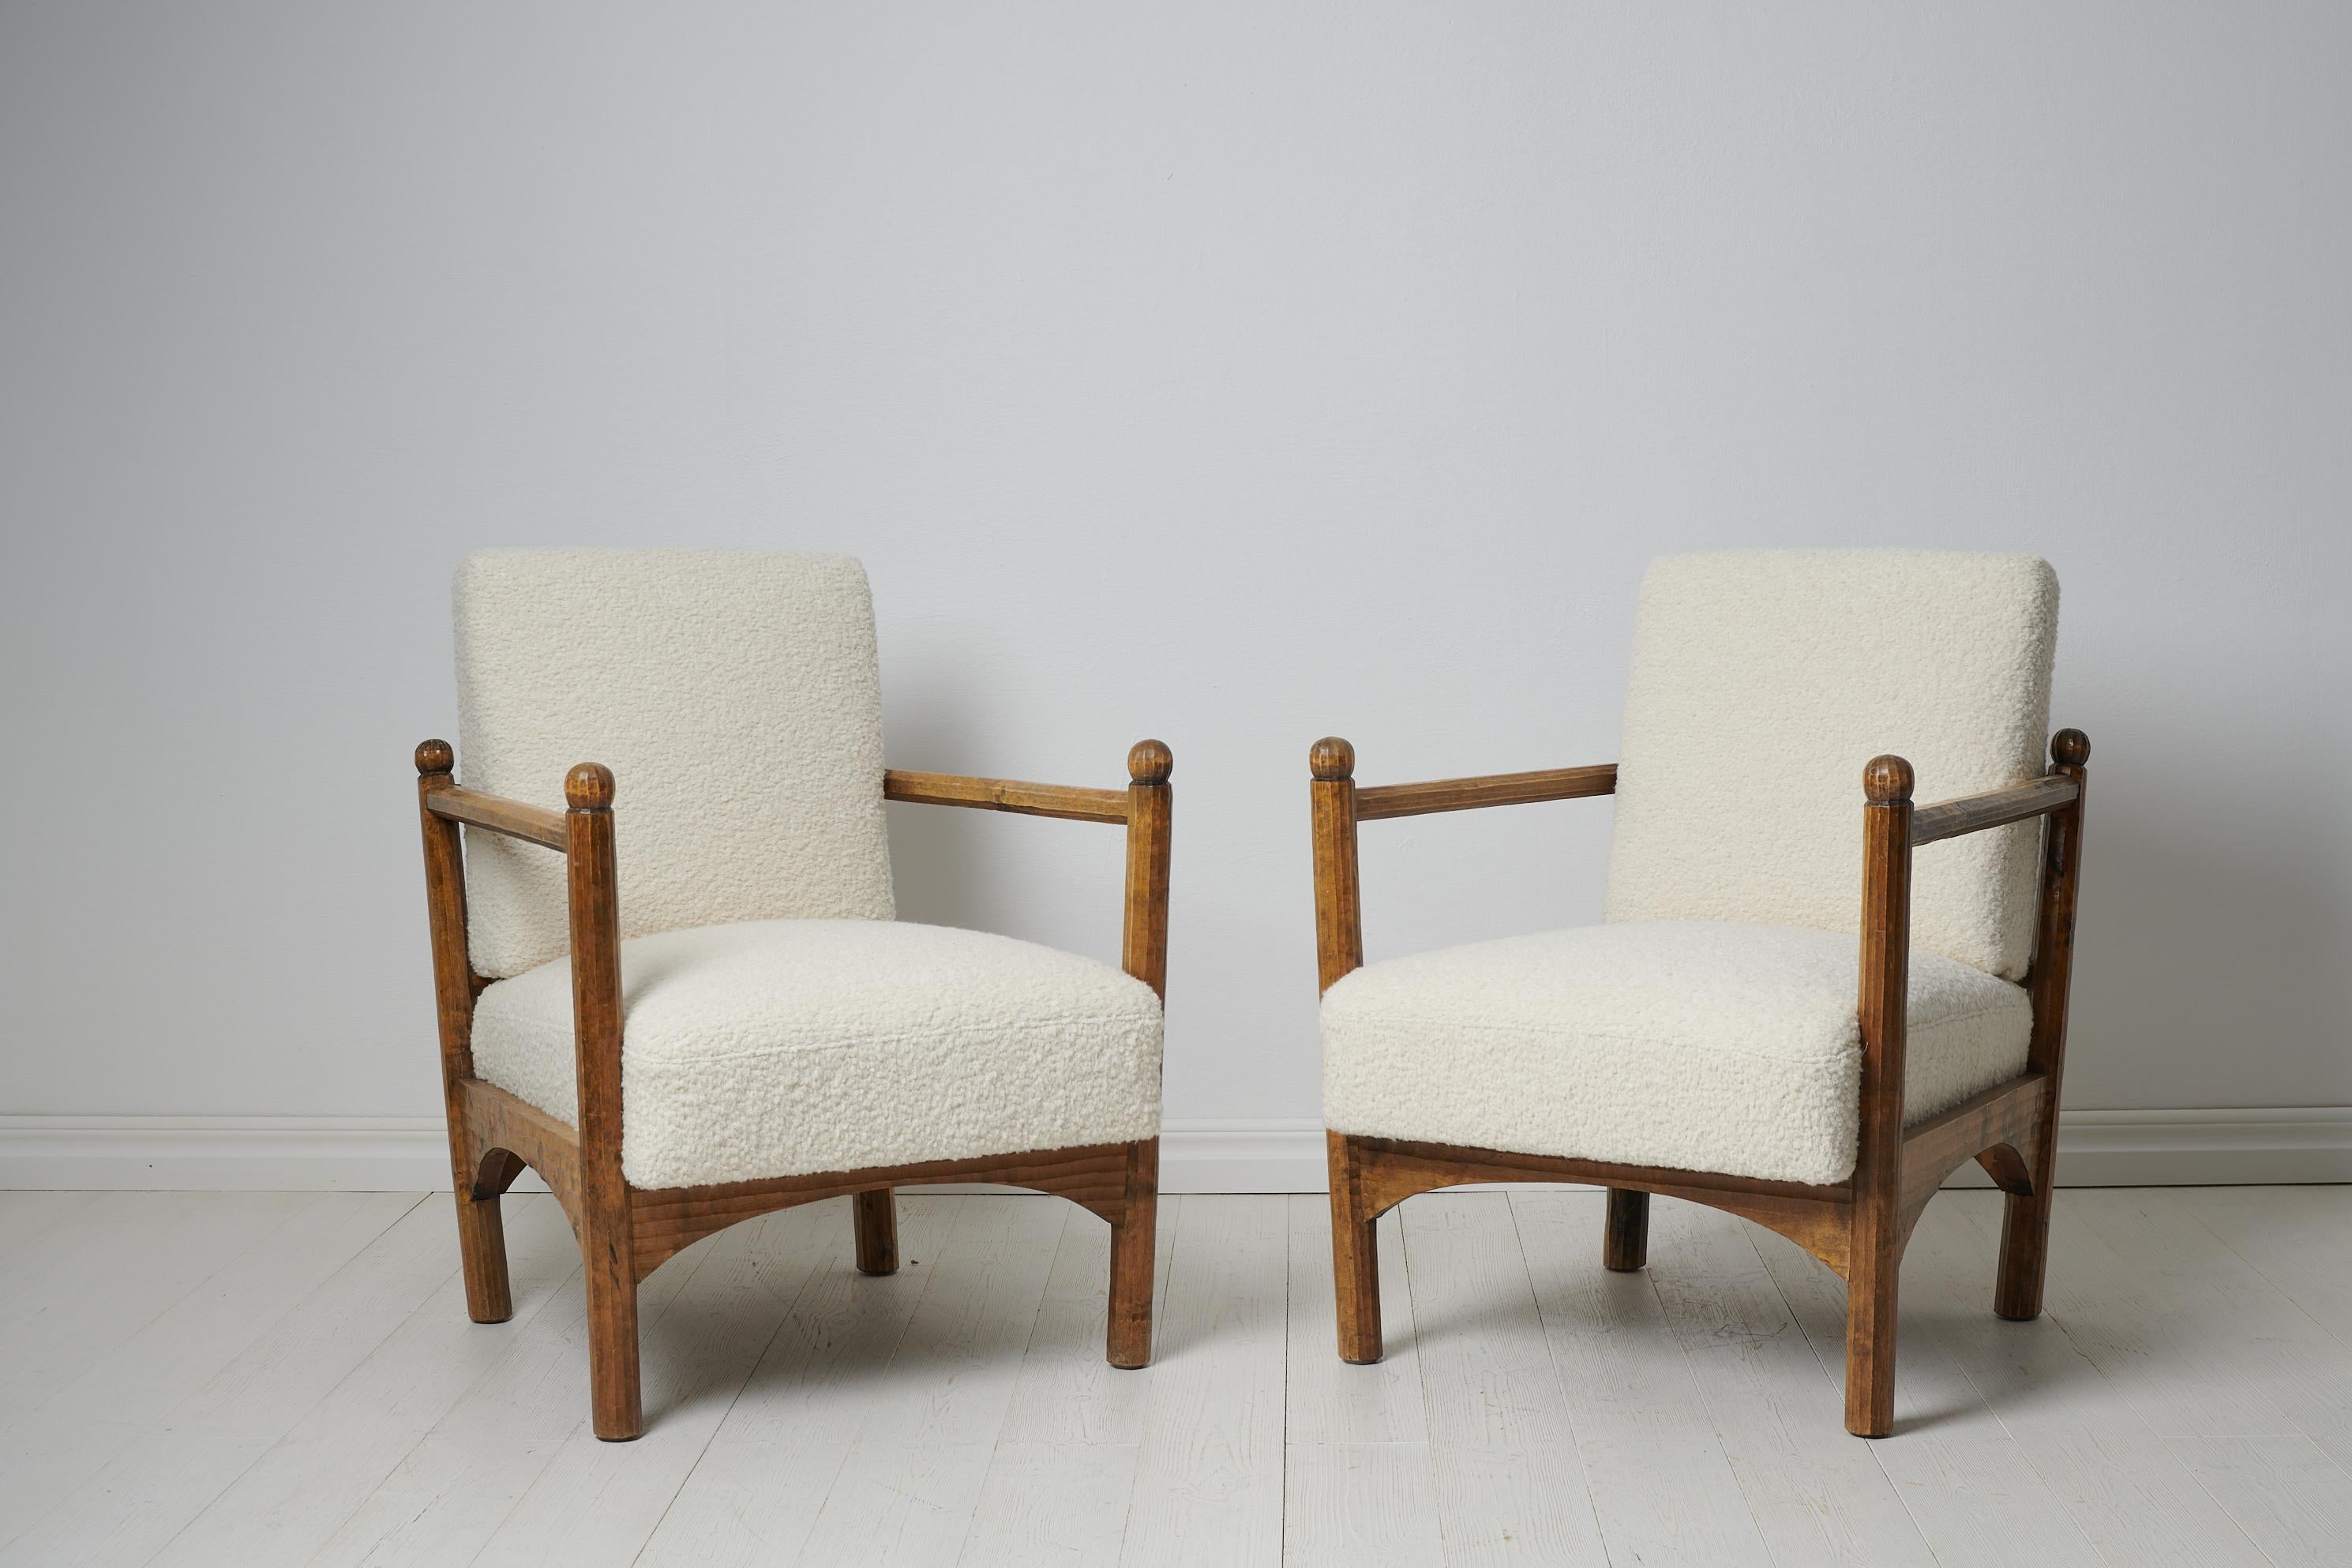 Swedish grace upholstered armchairs from the early 20th century, around 1920 to 1930 in Sweden. The armchairs are unusual and made in a style similar to that of Swedish designer Axel Einar Hjort. The chairs have a frame in stained birch and hand